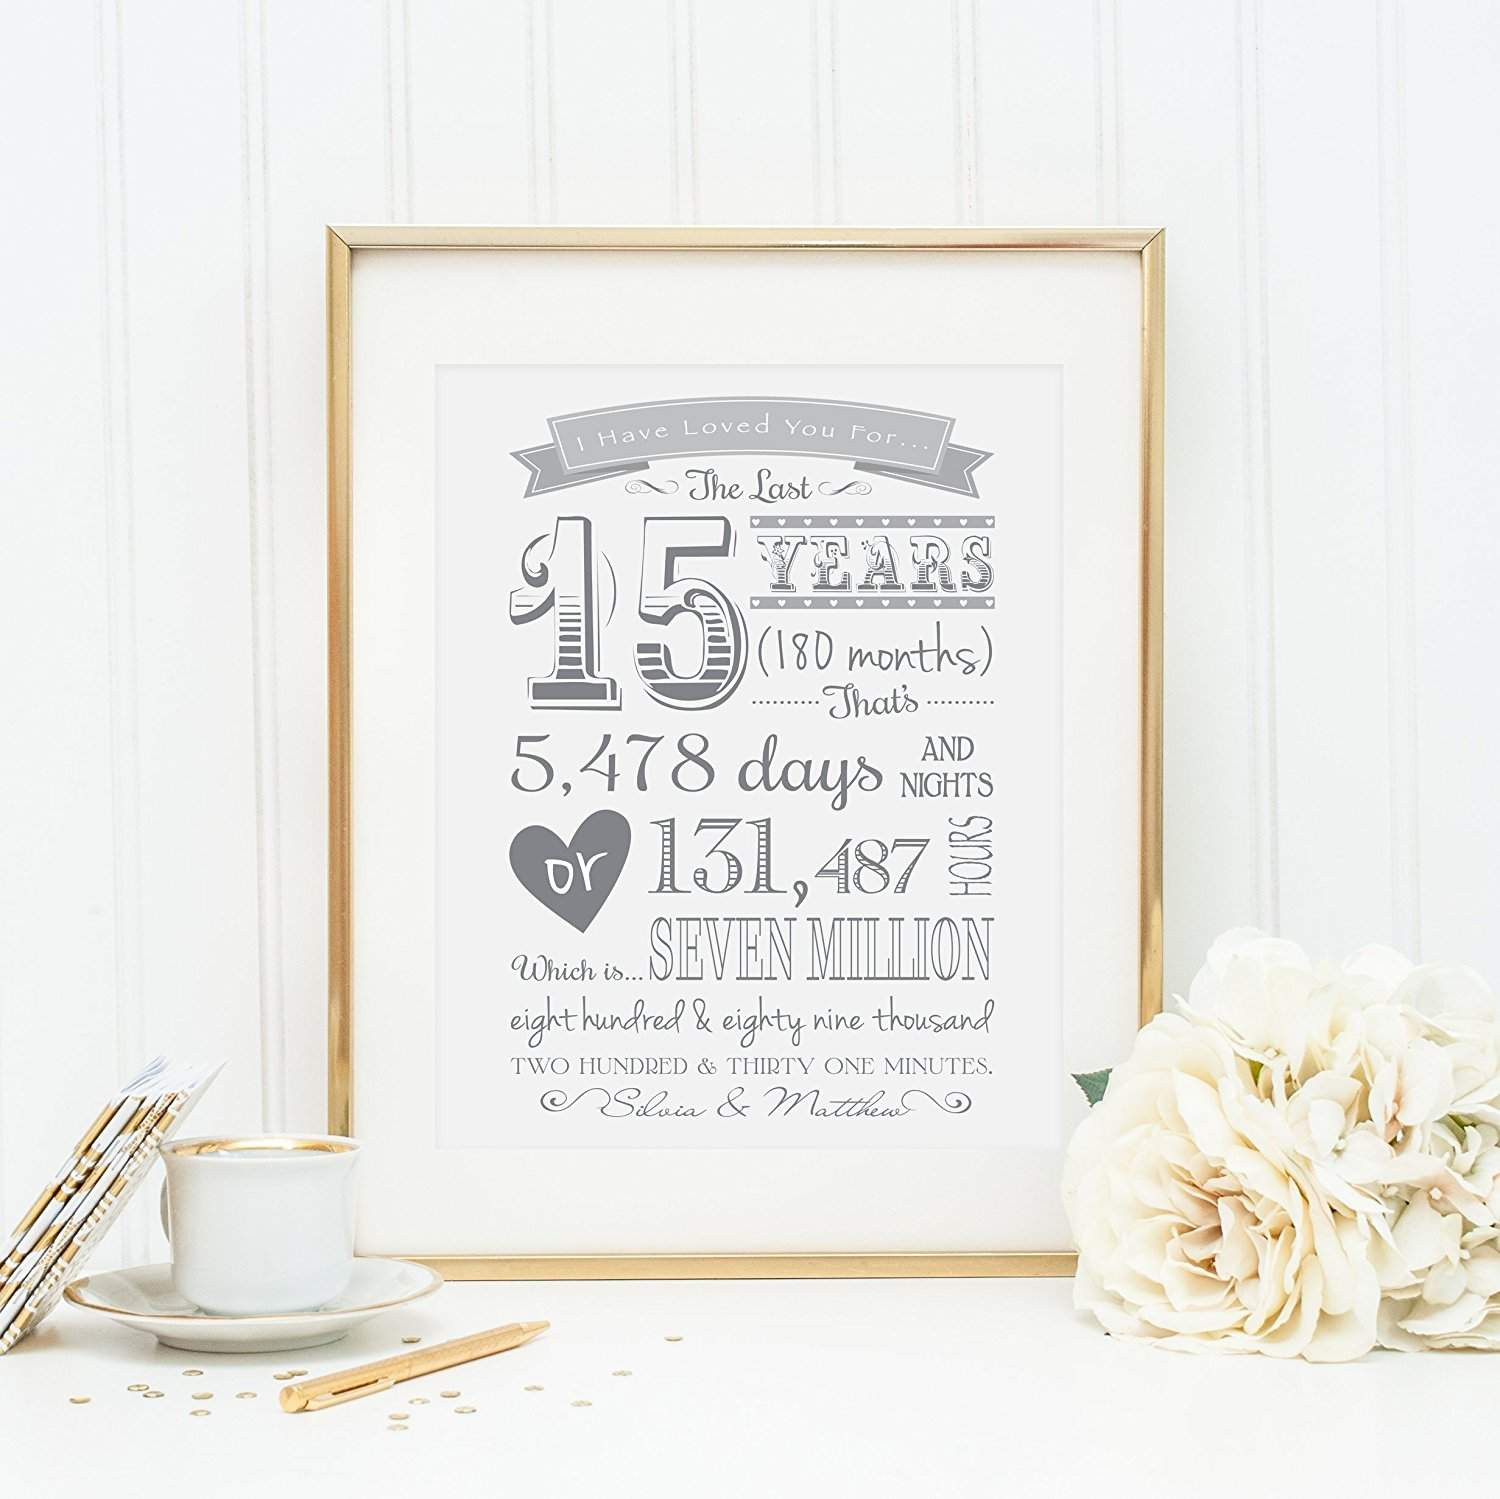 Wedding Gift Ideas For Bridegroom
 Best Wedding Day Gift Ideas From the Groom to the Bride